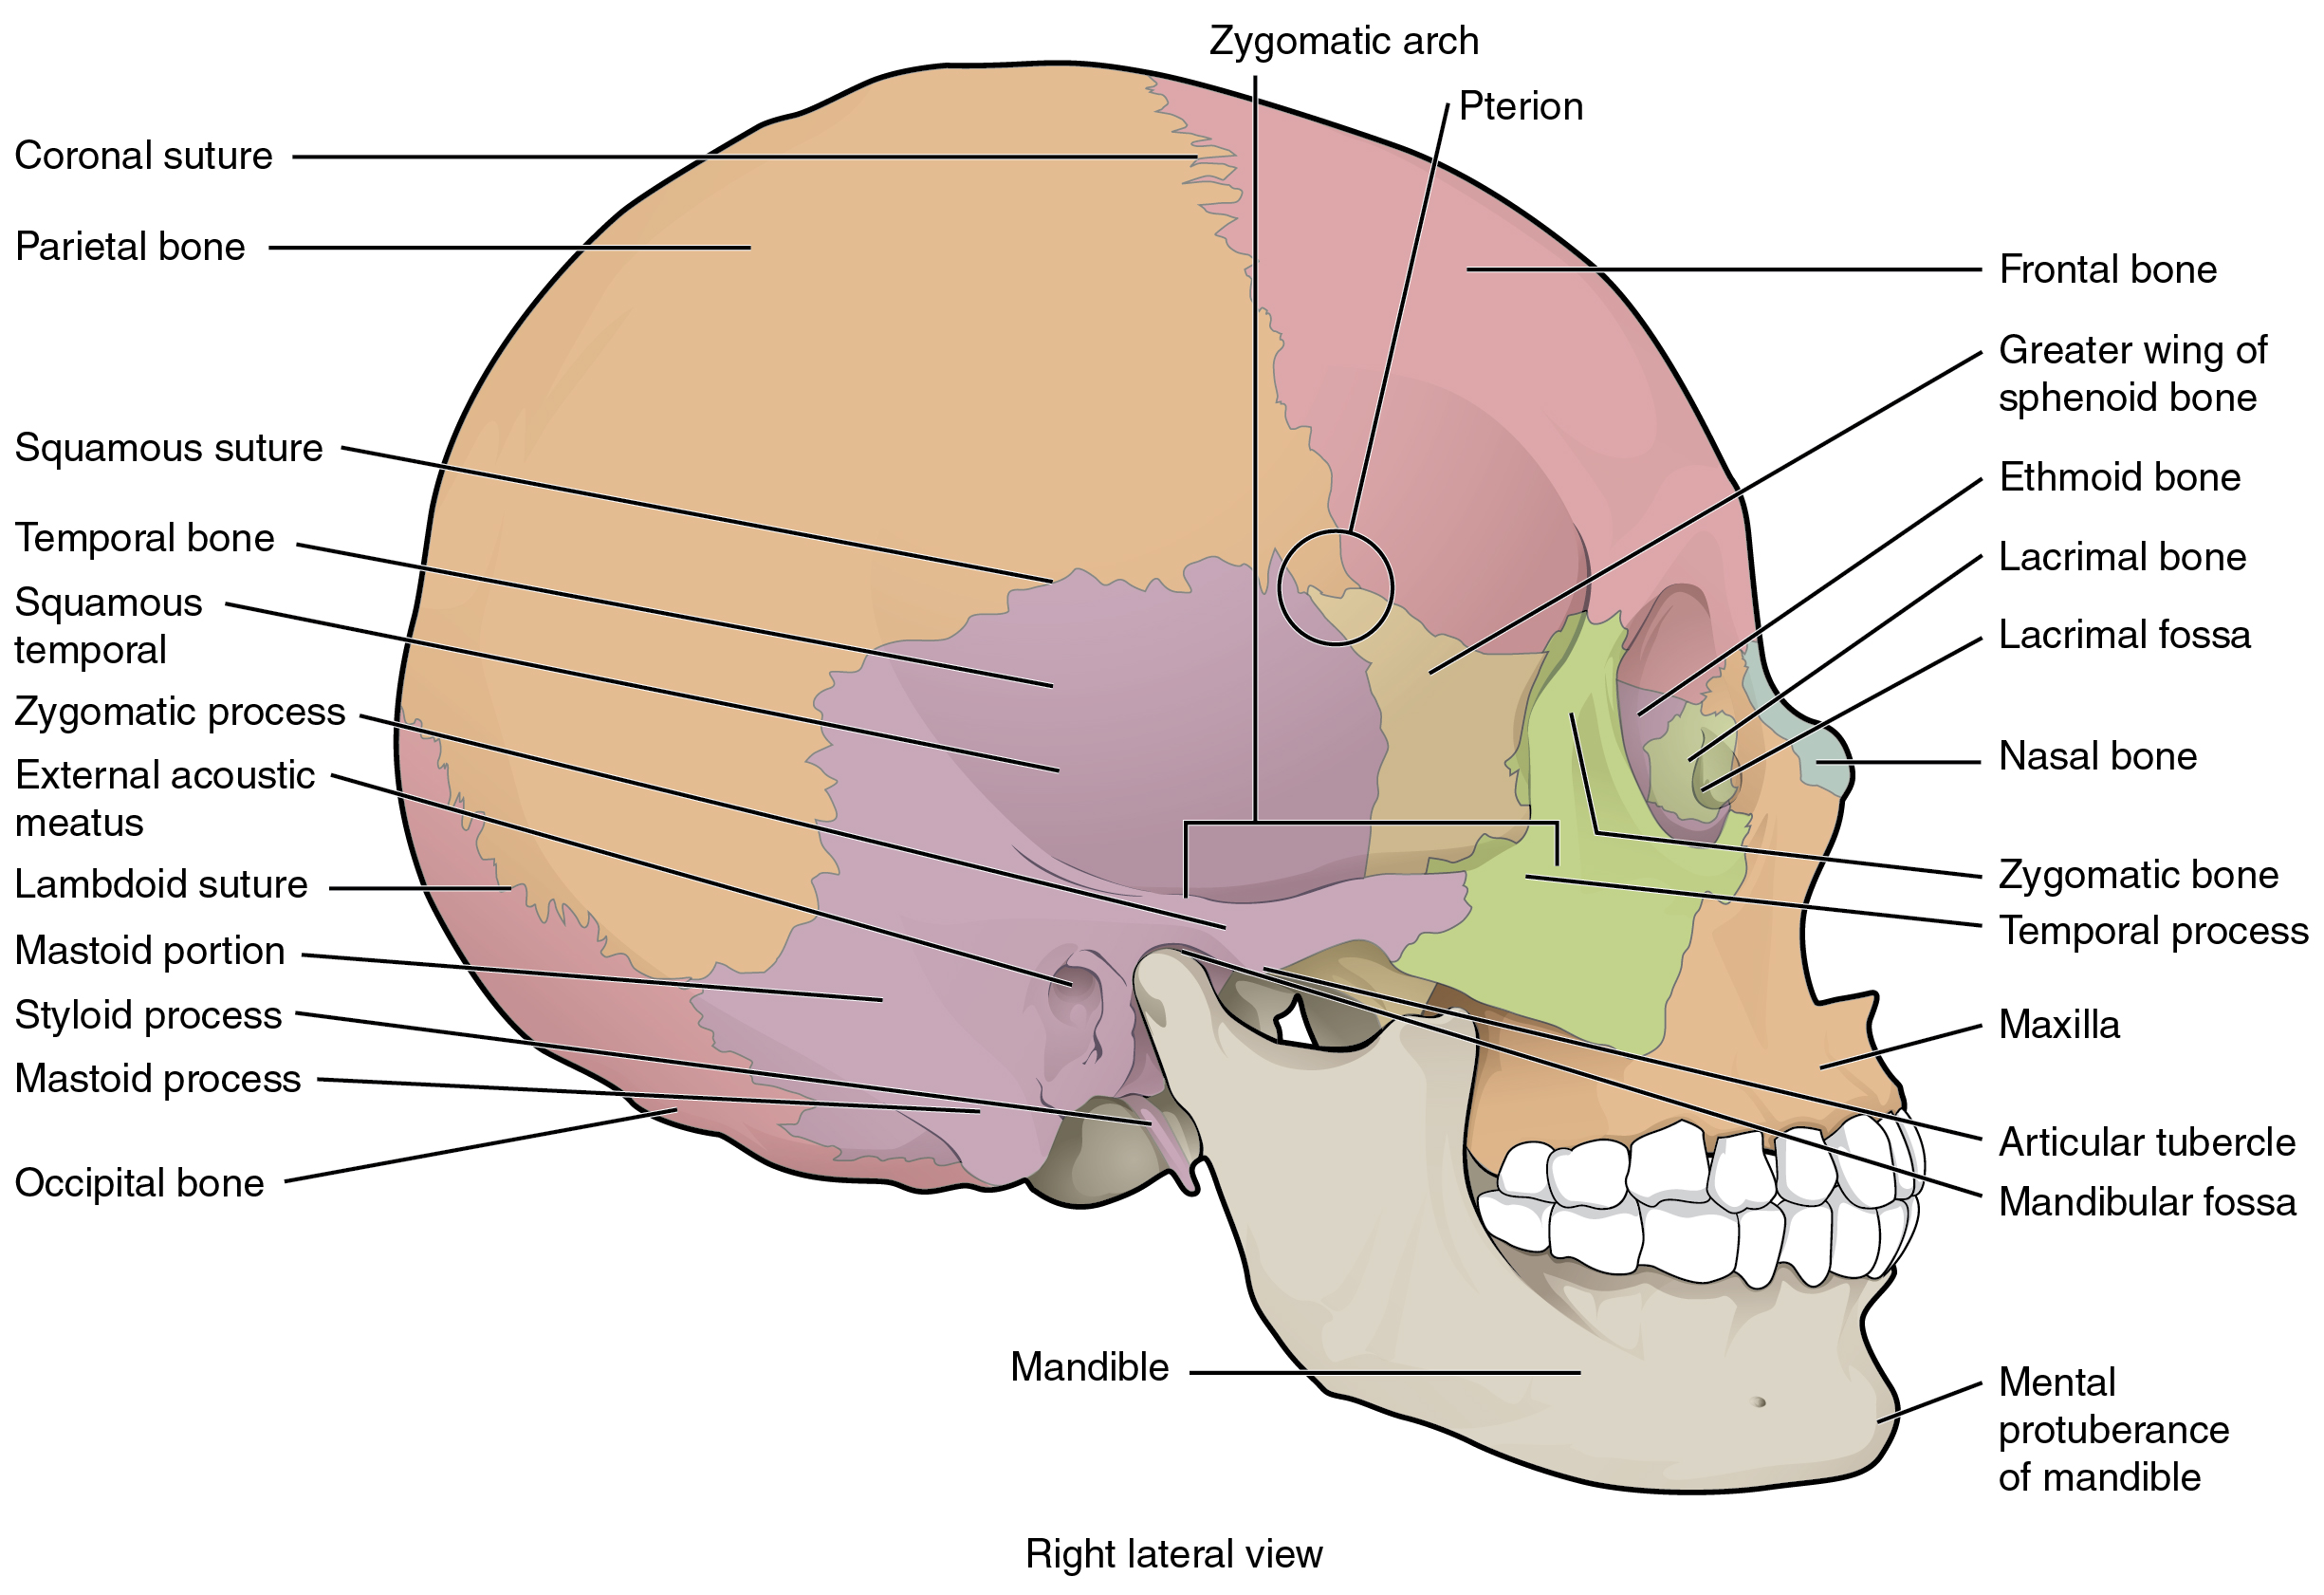 This image shows the lateral view of the human skull and identifies the